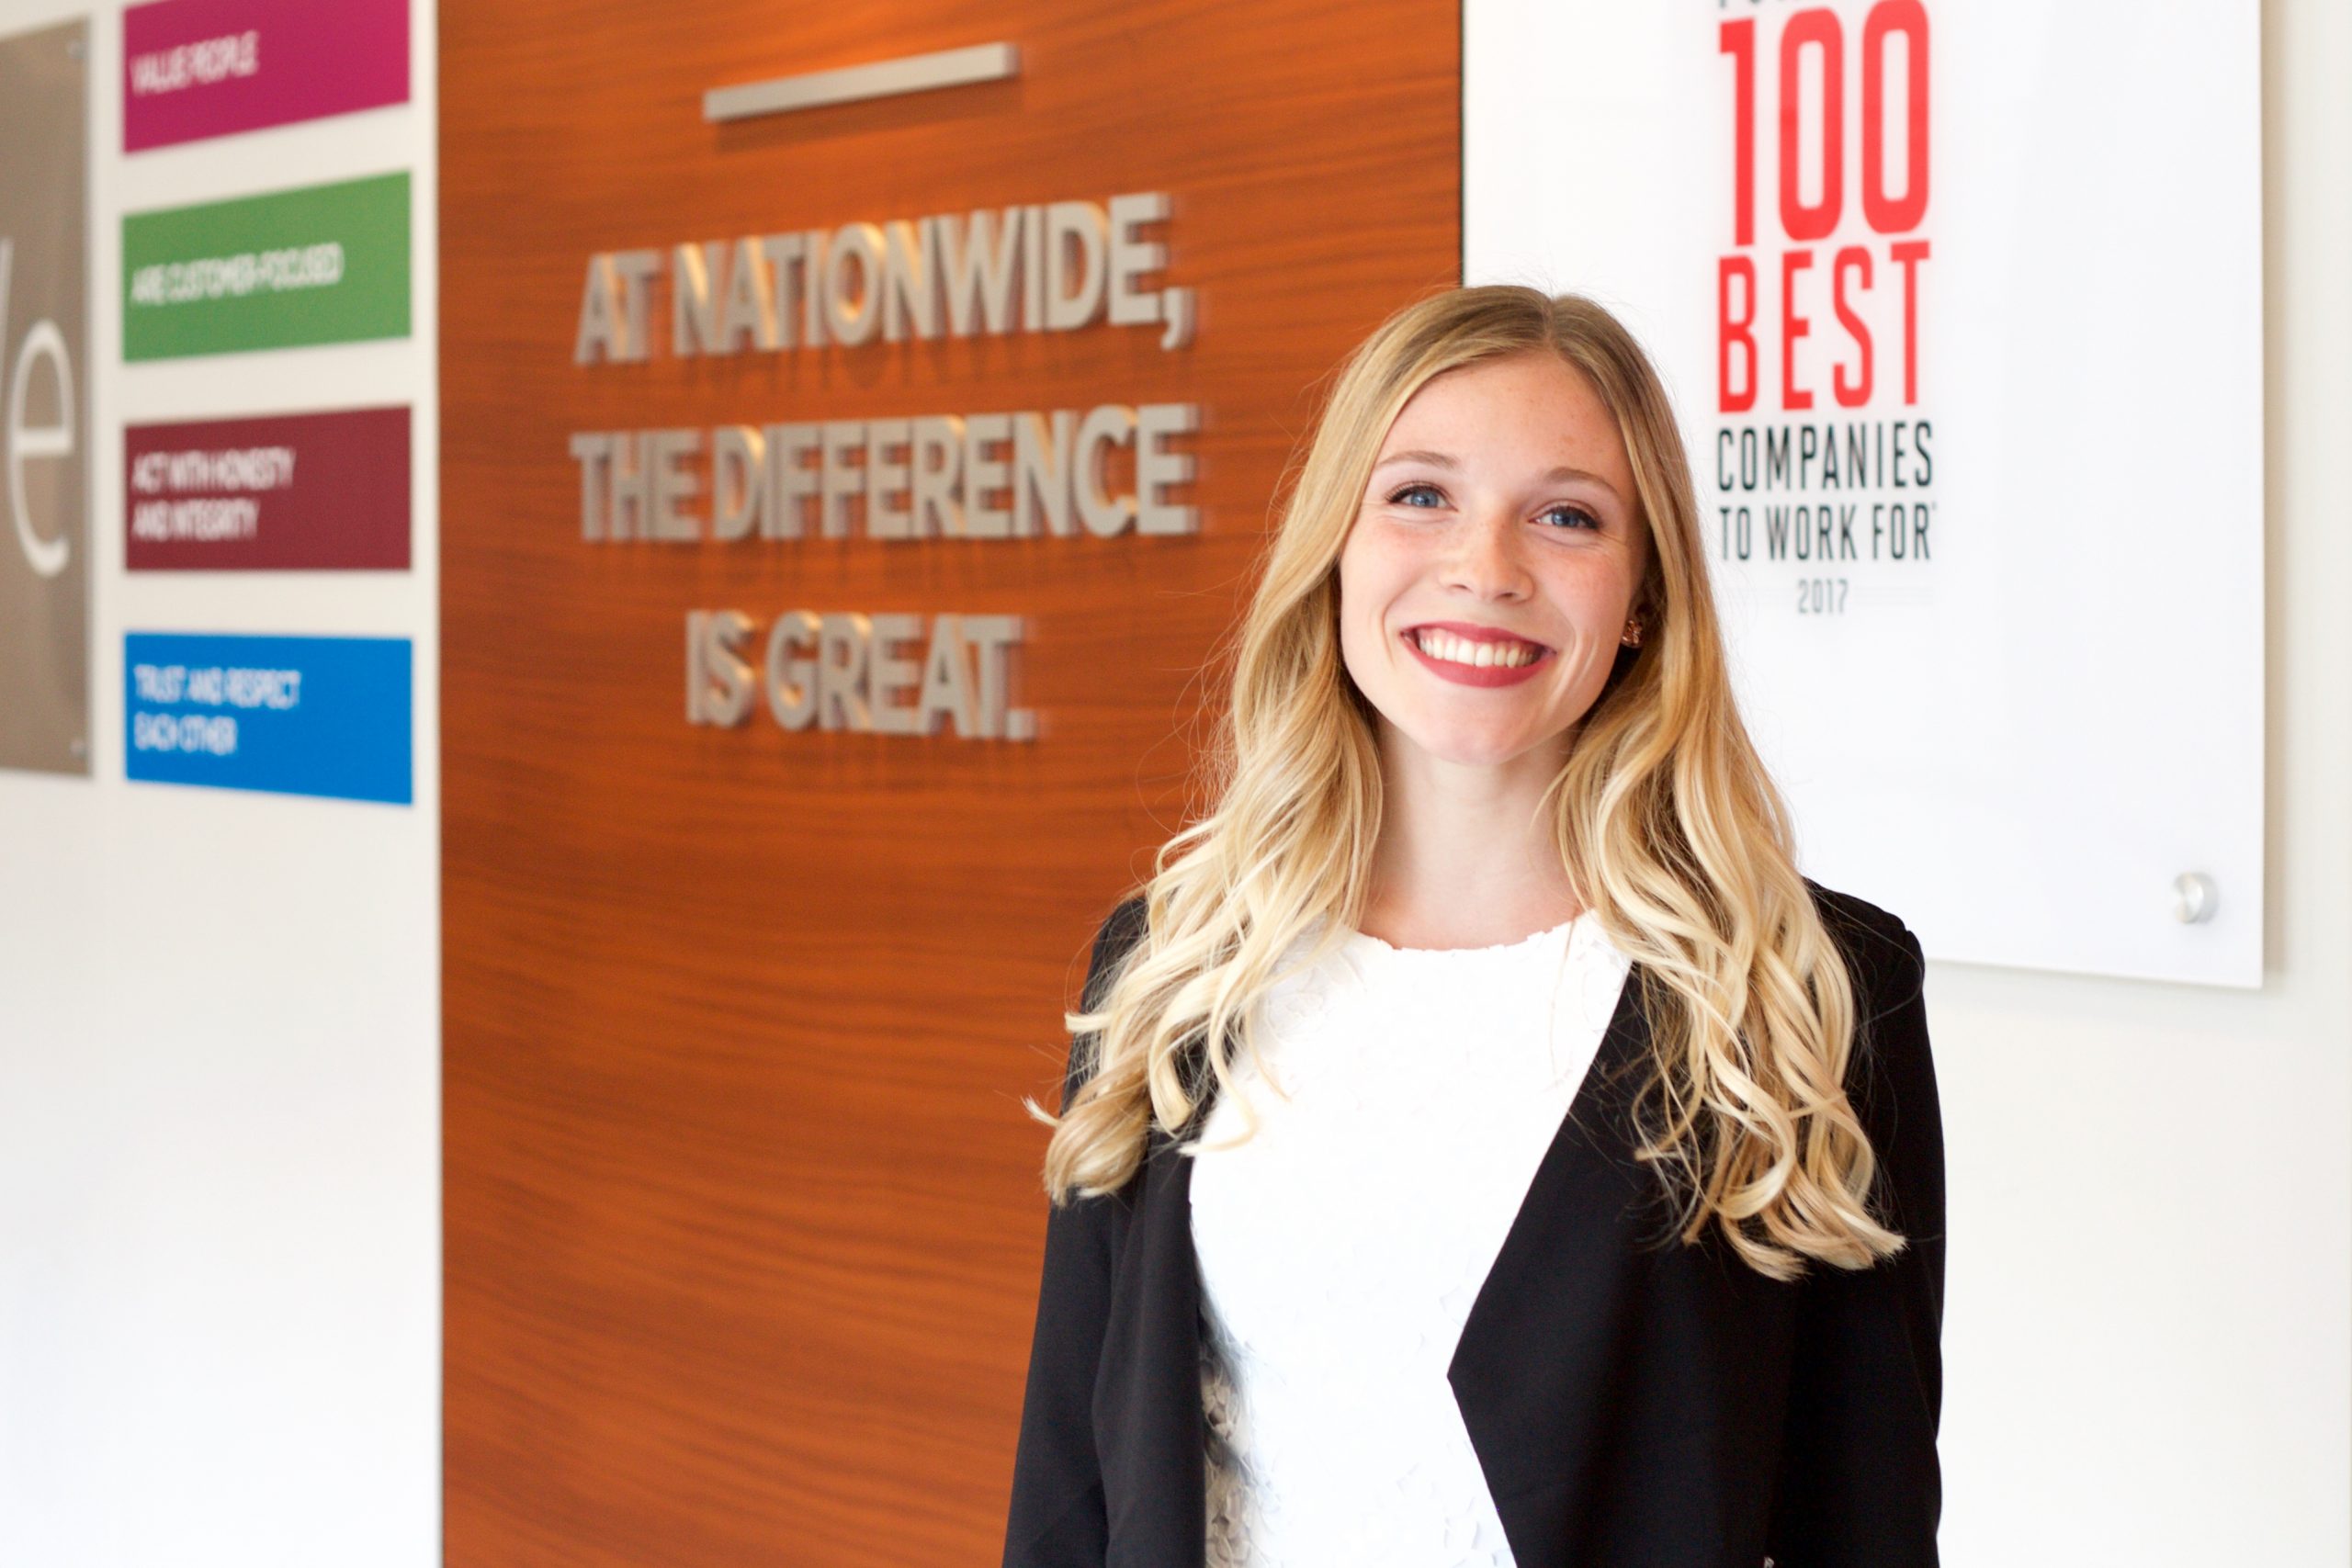 Undergraduate student Aimee Rodin poses at her internship at Nationwide Insurance Company. On the wall behind her the company has a sign that it is part of 100 Best Companies to Work For.